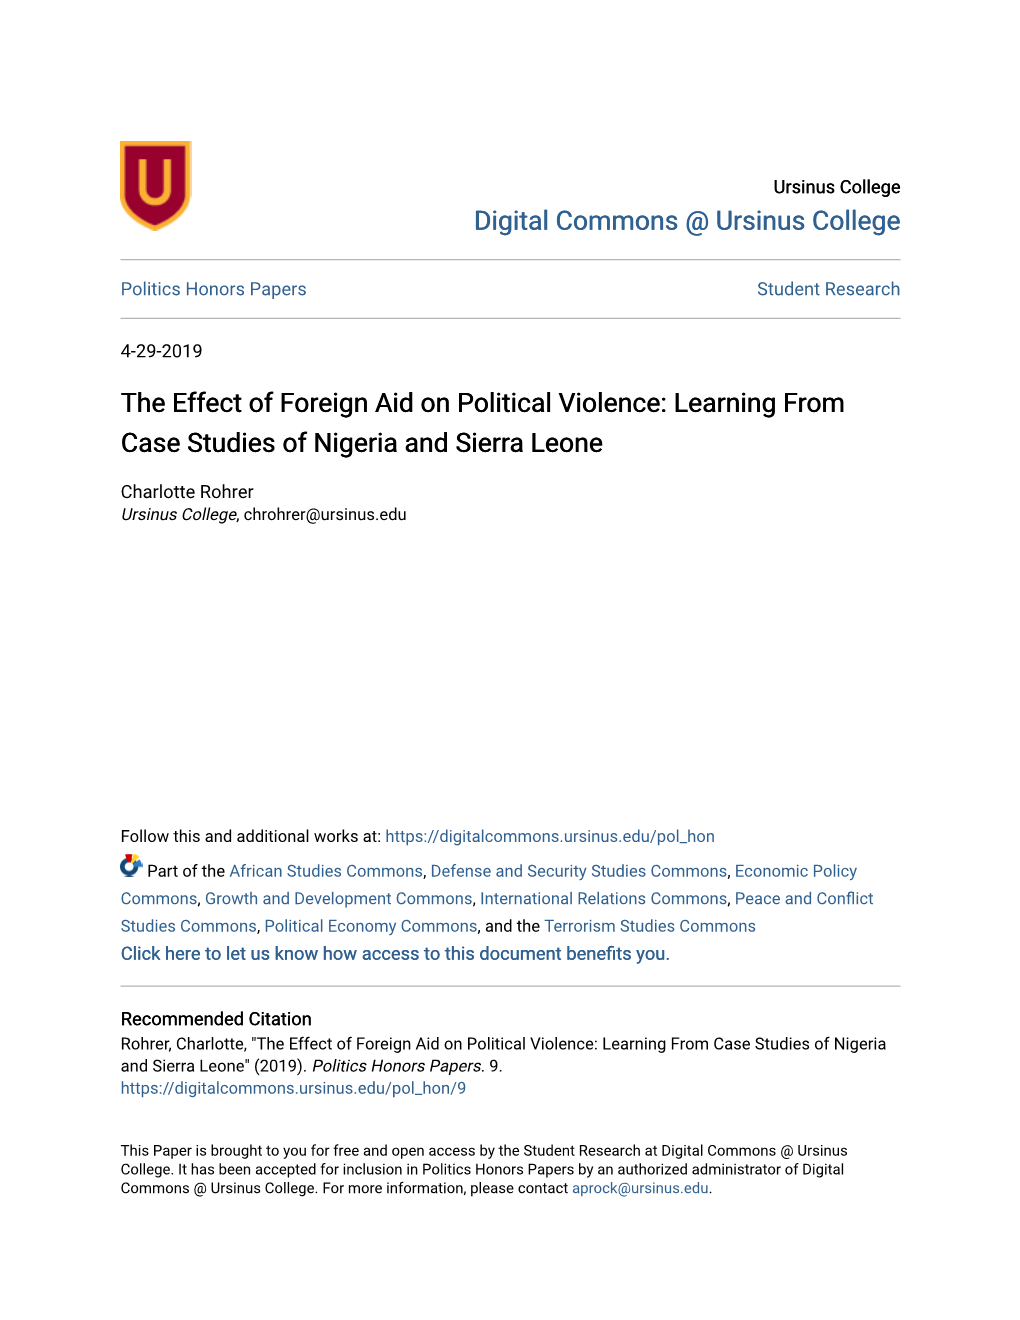 The Effect of Foreign Aid on Political Violence: Learning from Case Studies of Nigeria and Sierra Leone